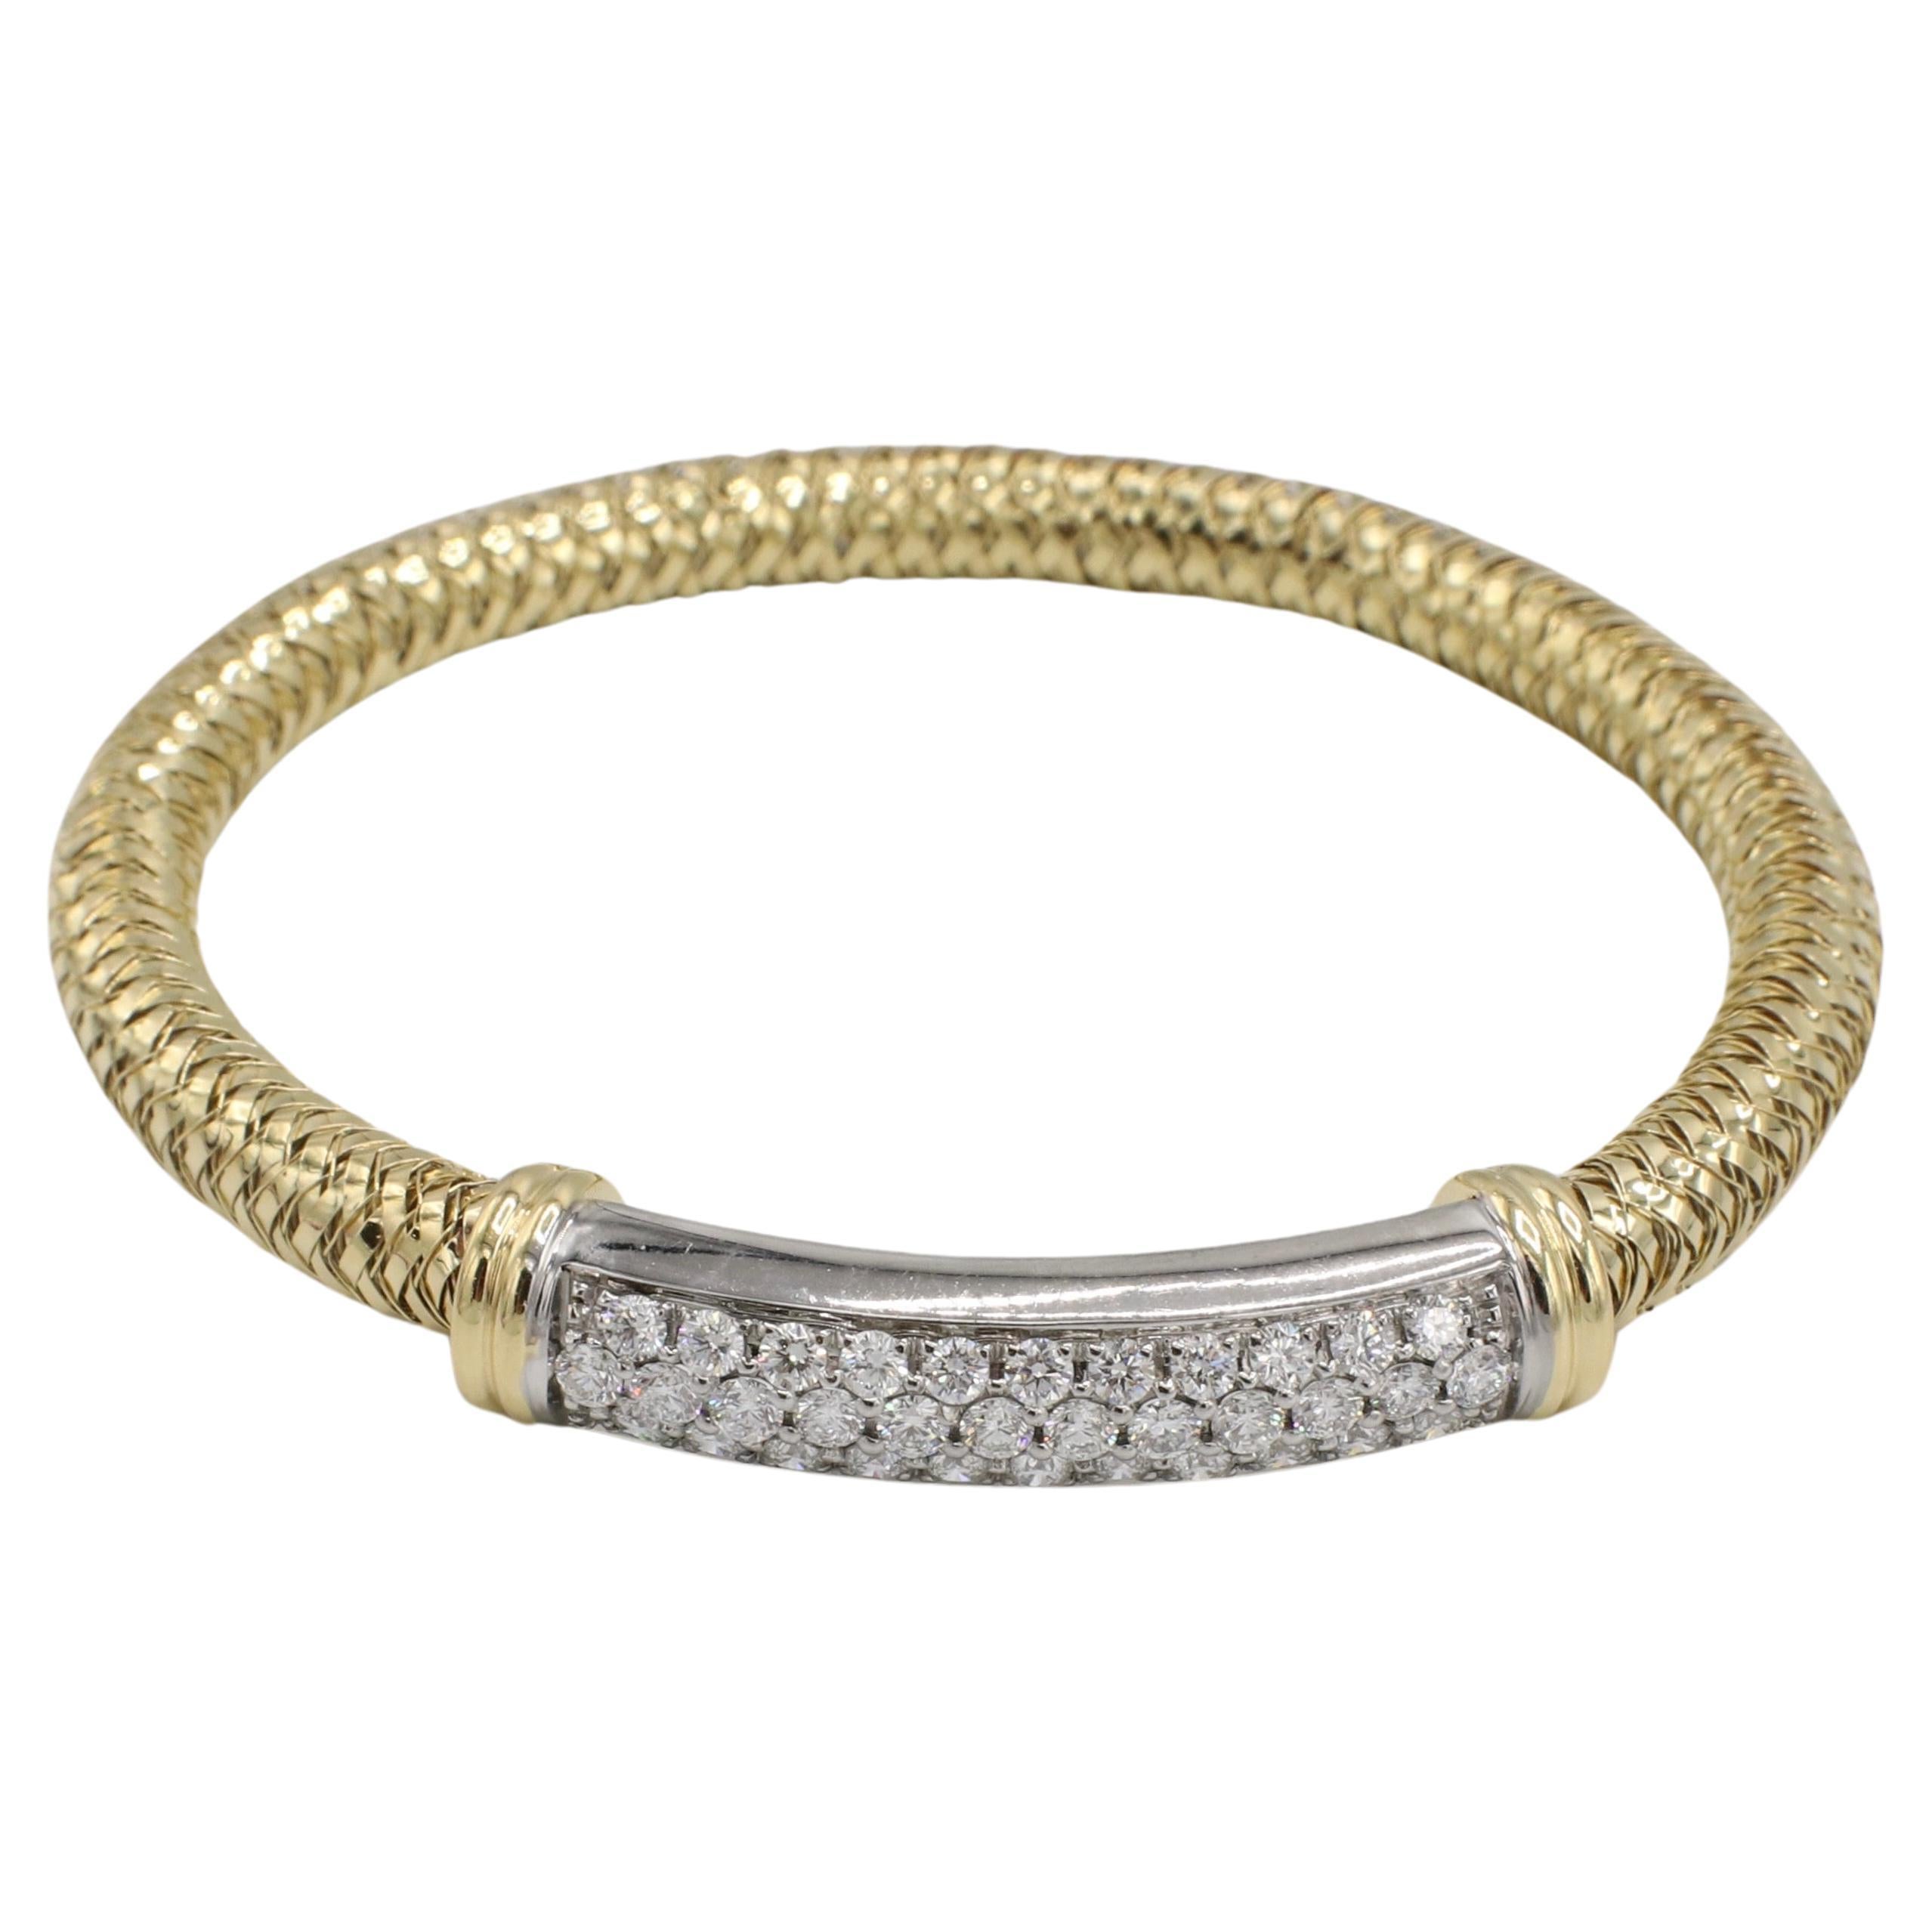 Roberto Coin Primavera 18 Karat Yellow Gold & Pave Natural Diamond Bar Stretch Bracelet 
Metal: 18k yellow gold & white gold
Weight: 16.27 grams
Diamonds: Approx. 1.50 CTW F-G VS round natural diamonds
Circumference: 6.5 inchse
Width: 5mm
Pave